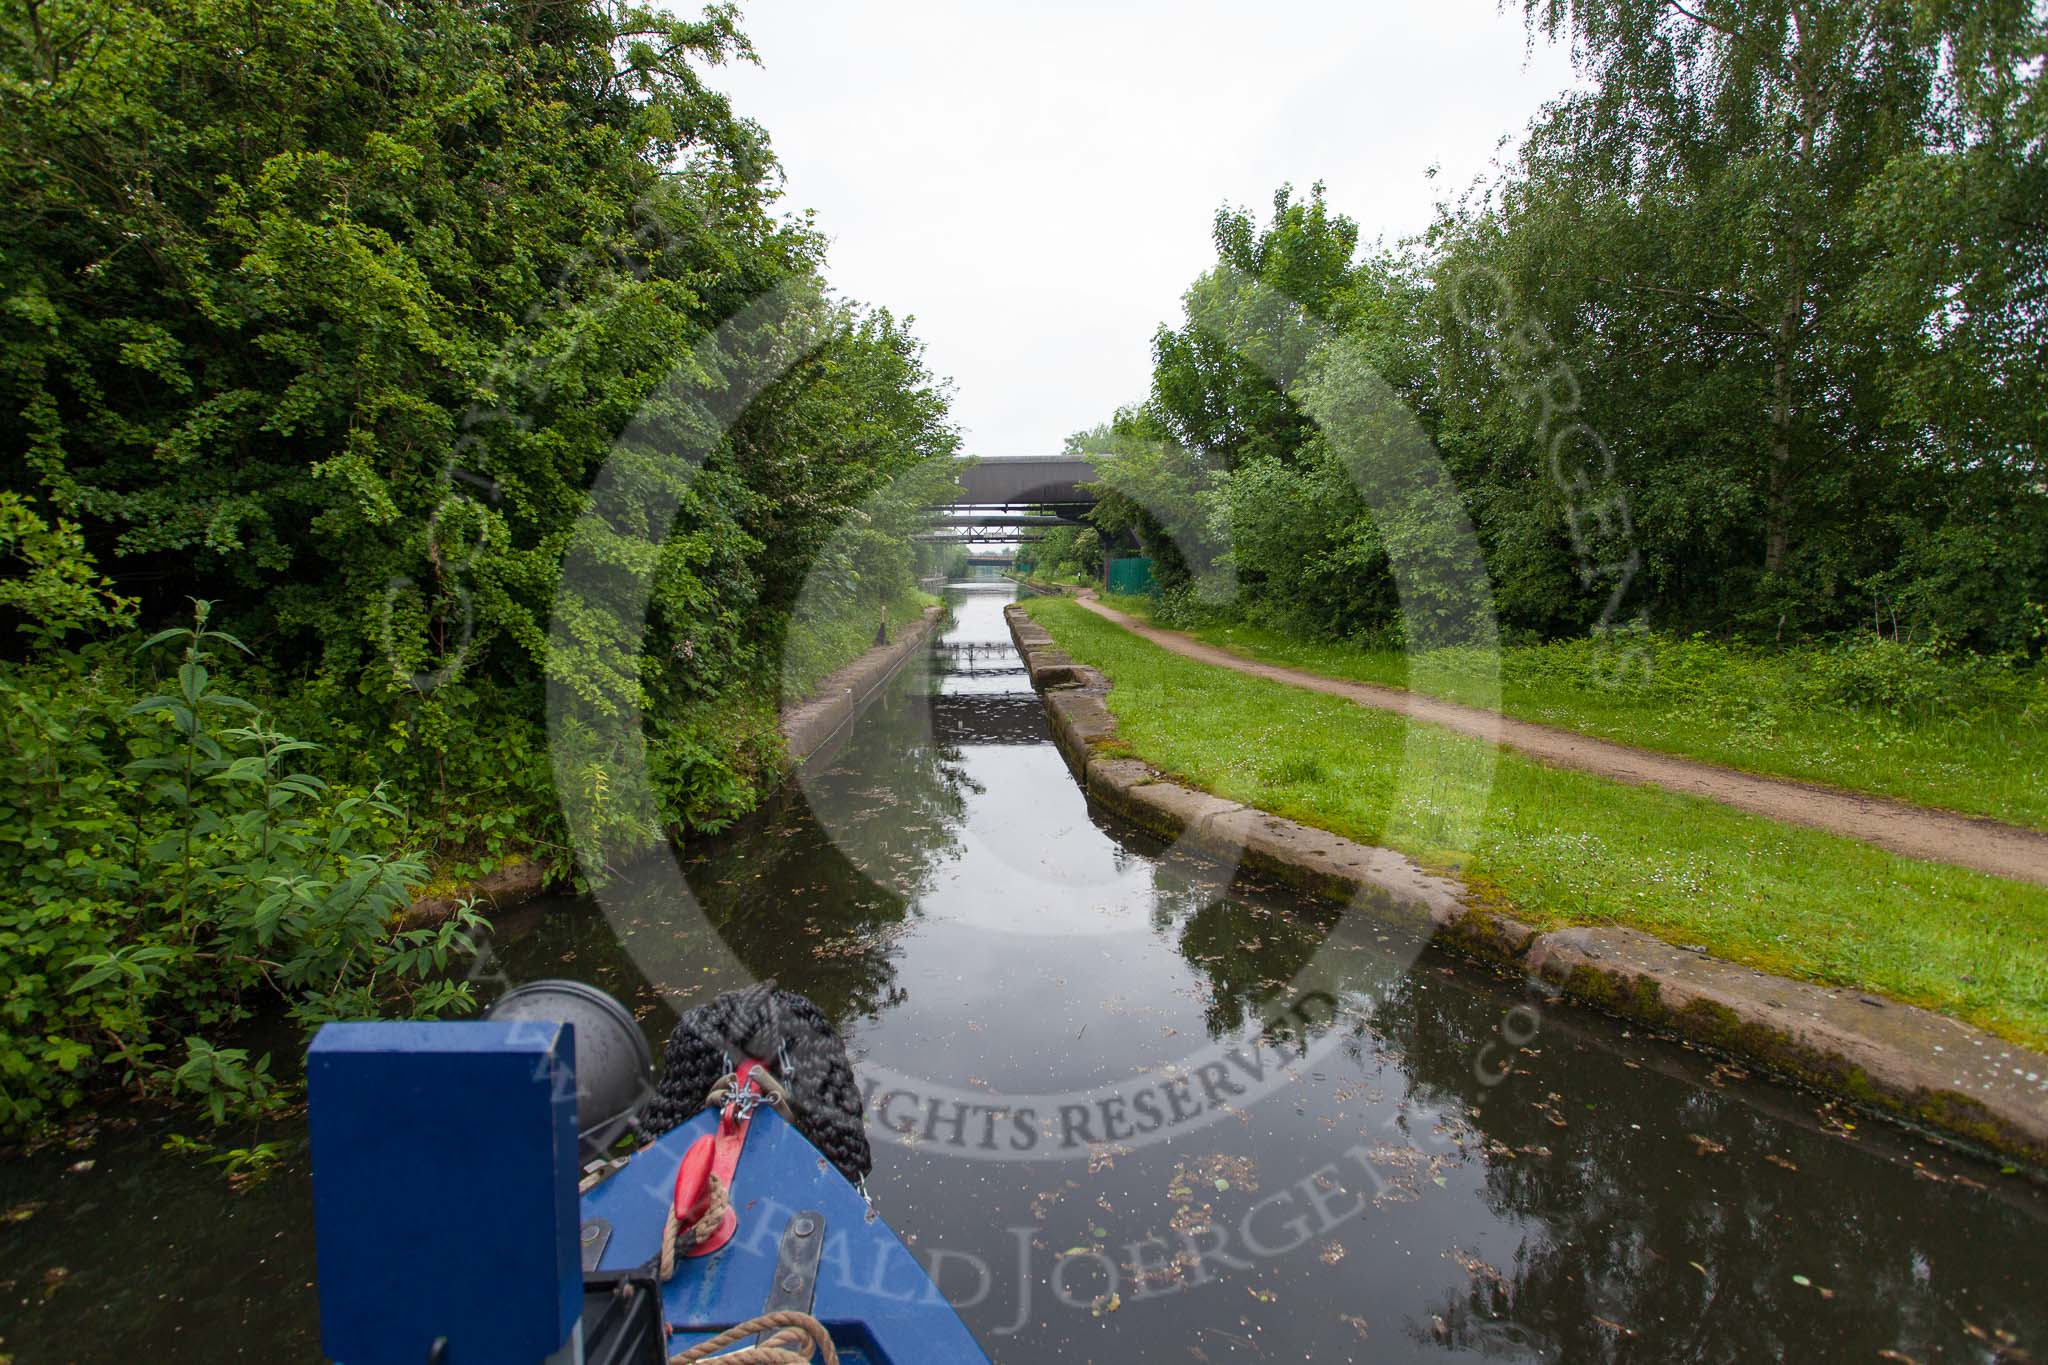 BCN Marathon Challenge 2014: The start of the BSN Marathon Challenge for Felonious Mongoose at the former stop lock at Salford Junction, Grand Union Canal (Birmingham & Warwick Junction Canal)..
Birmingham Canal Navigation,


United Kingdom,
on 24 May 2014 at 08:05, image #73